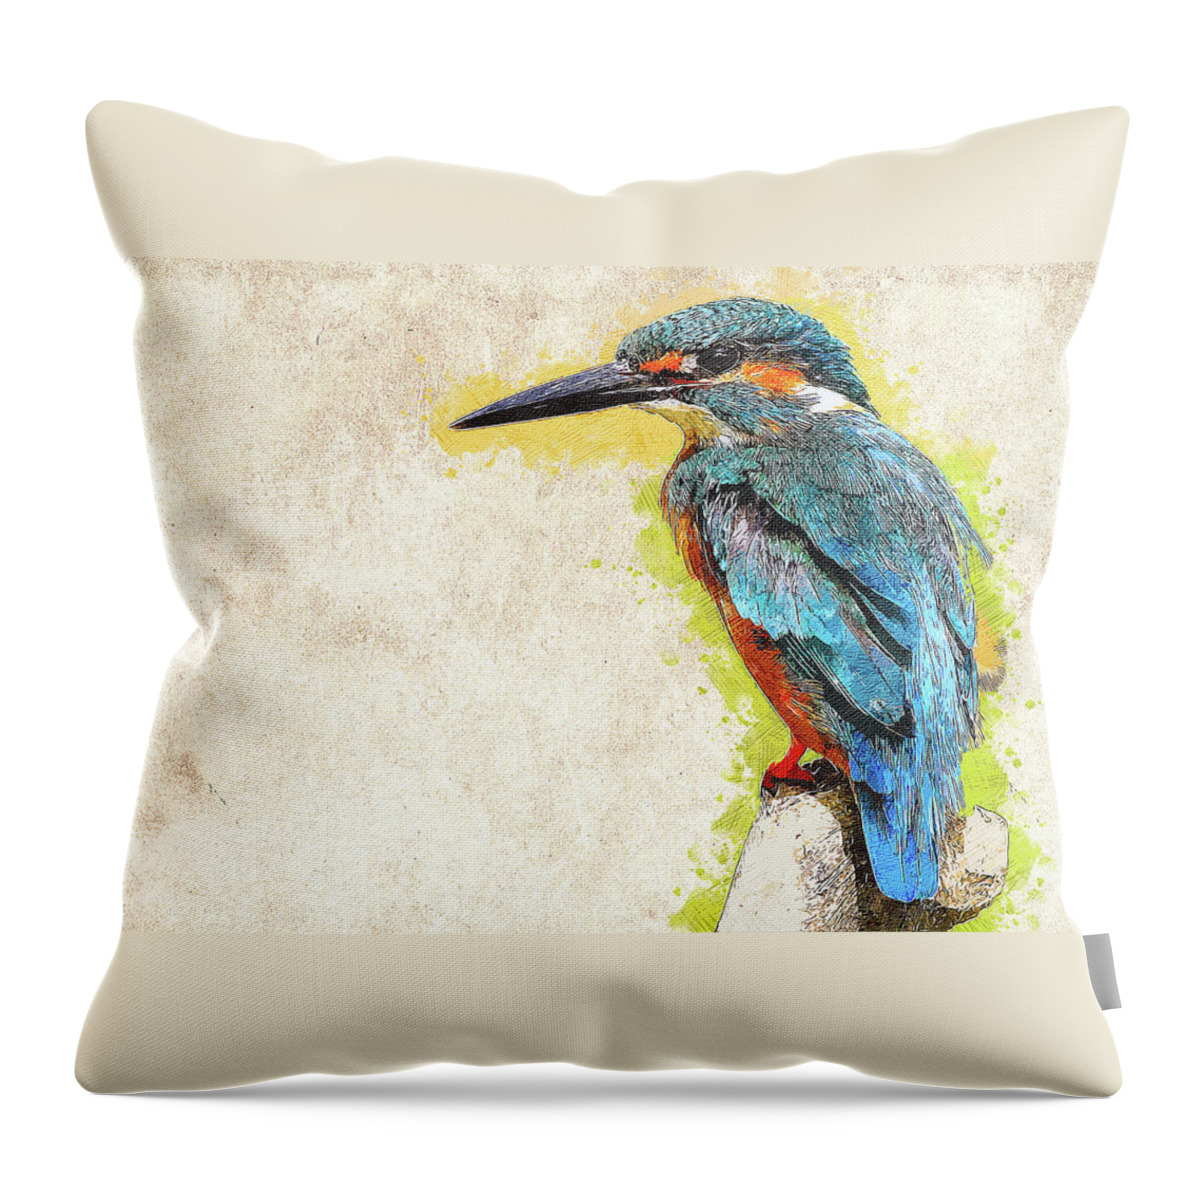 Common Throw Pillow featuring the painting Emerald Blue Common Kingfisher by Custom Pet Portrait Art Studio